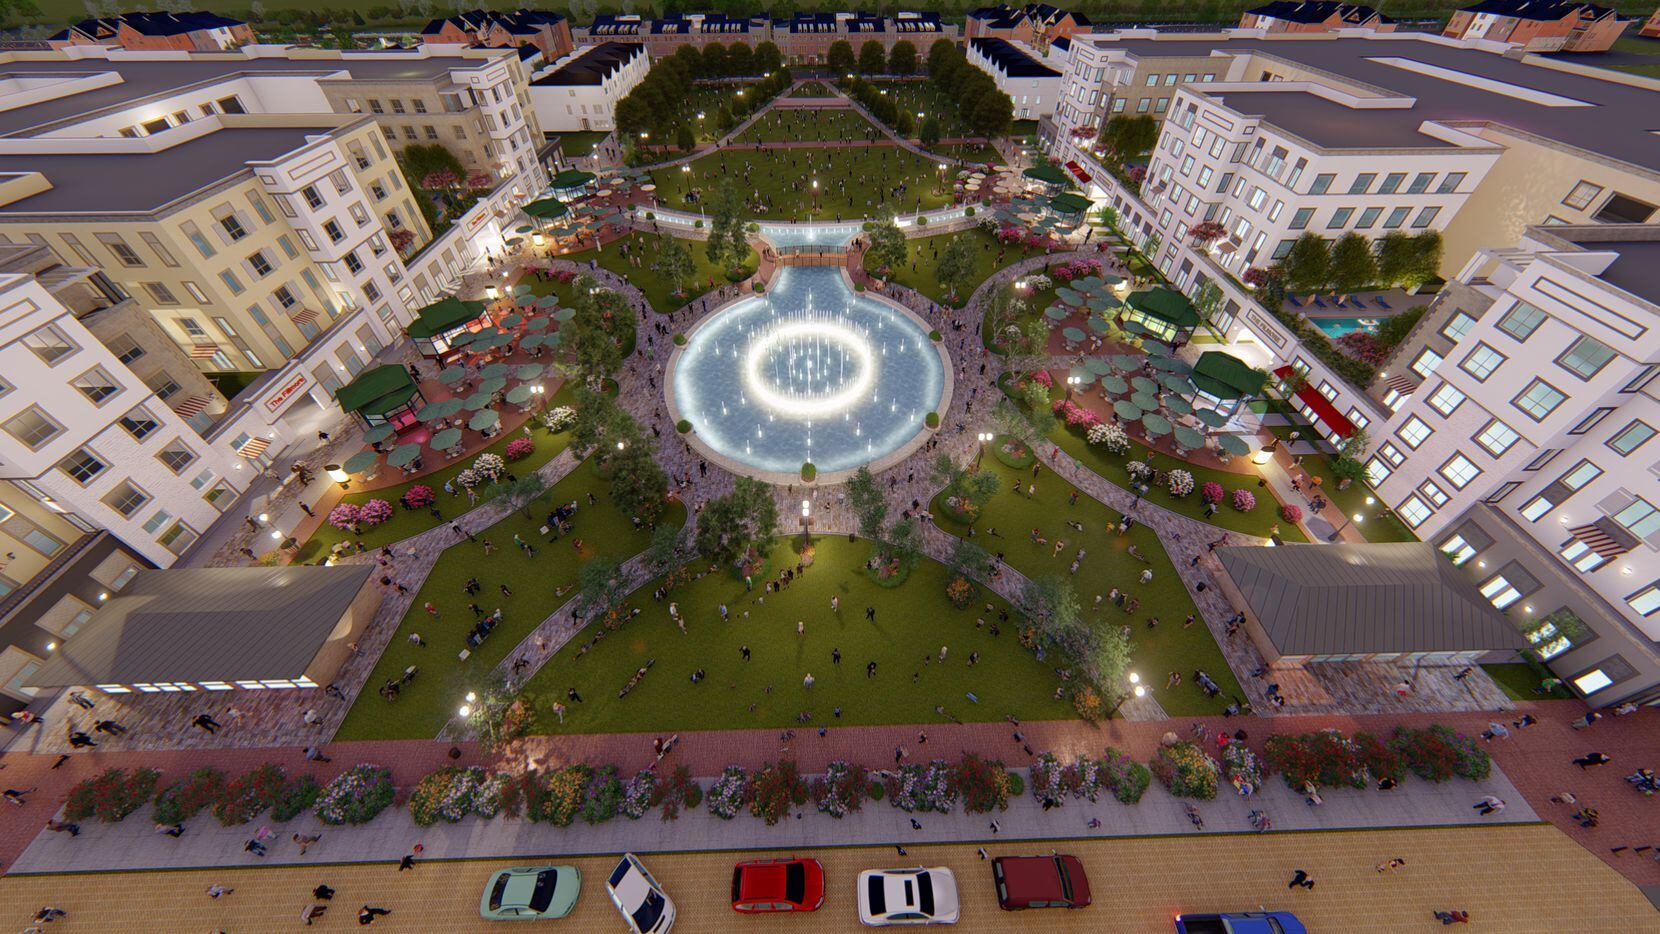 Centurion Development plans to redevelop the Collin Creek Mall site, which covers more than...